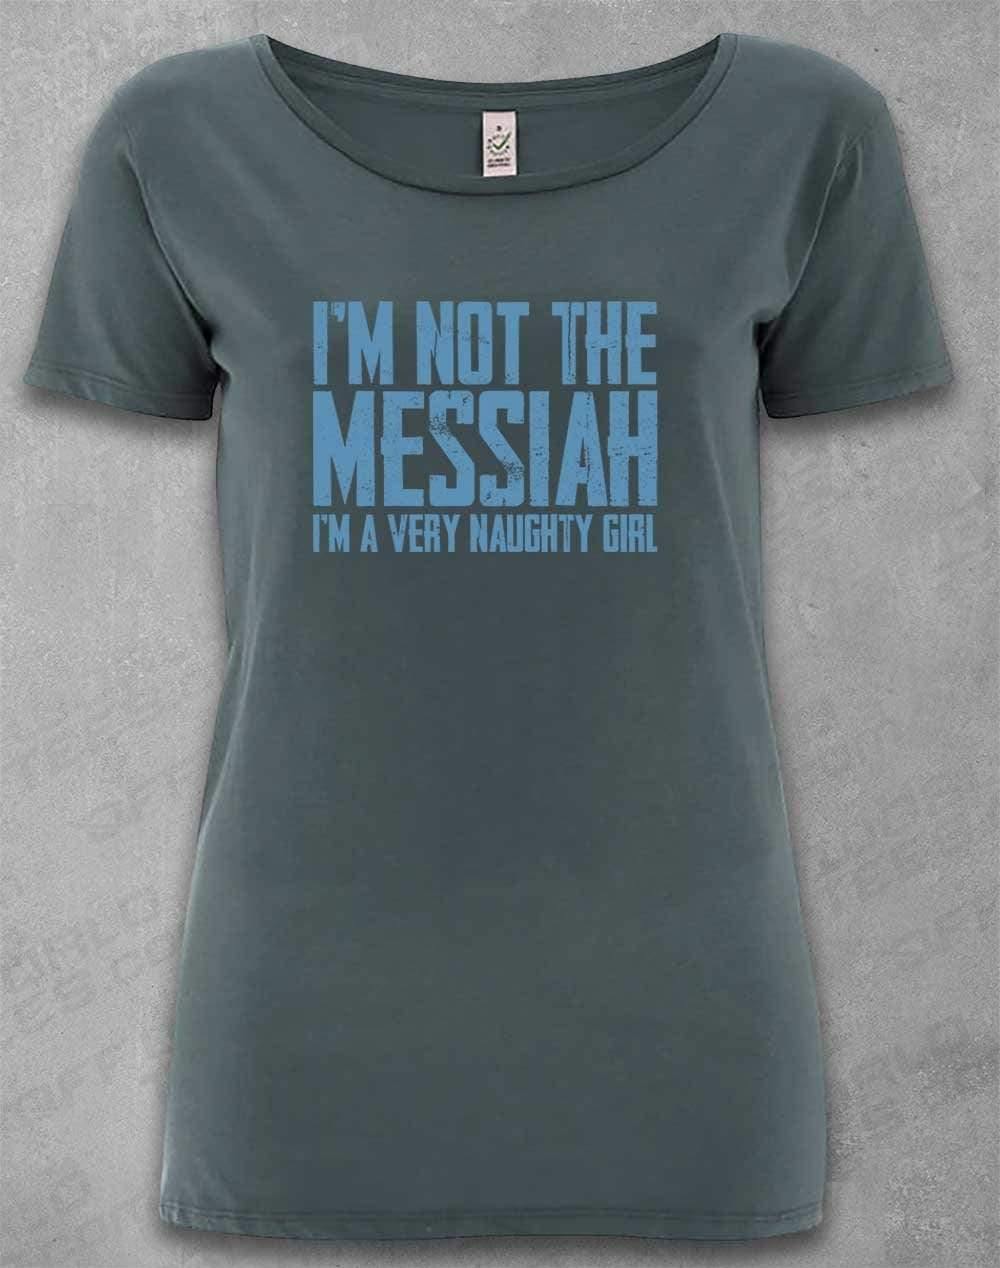 DELUXE I'm Not the Messiah I'm a Very Naughty Girl Organic Scoop Neck T-Shirt 8-10 / Light Charcoal  - Off World Tees